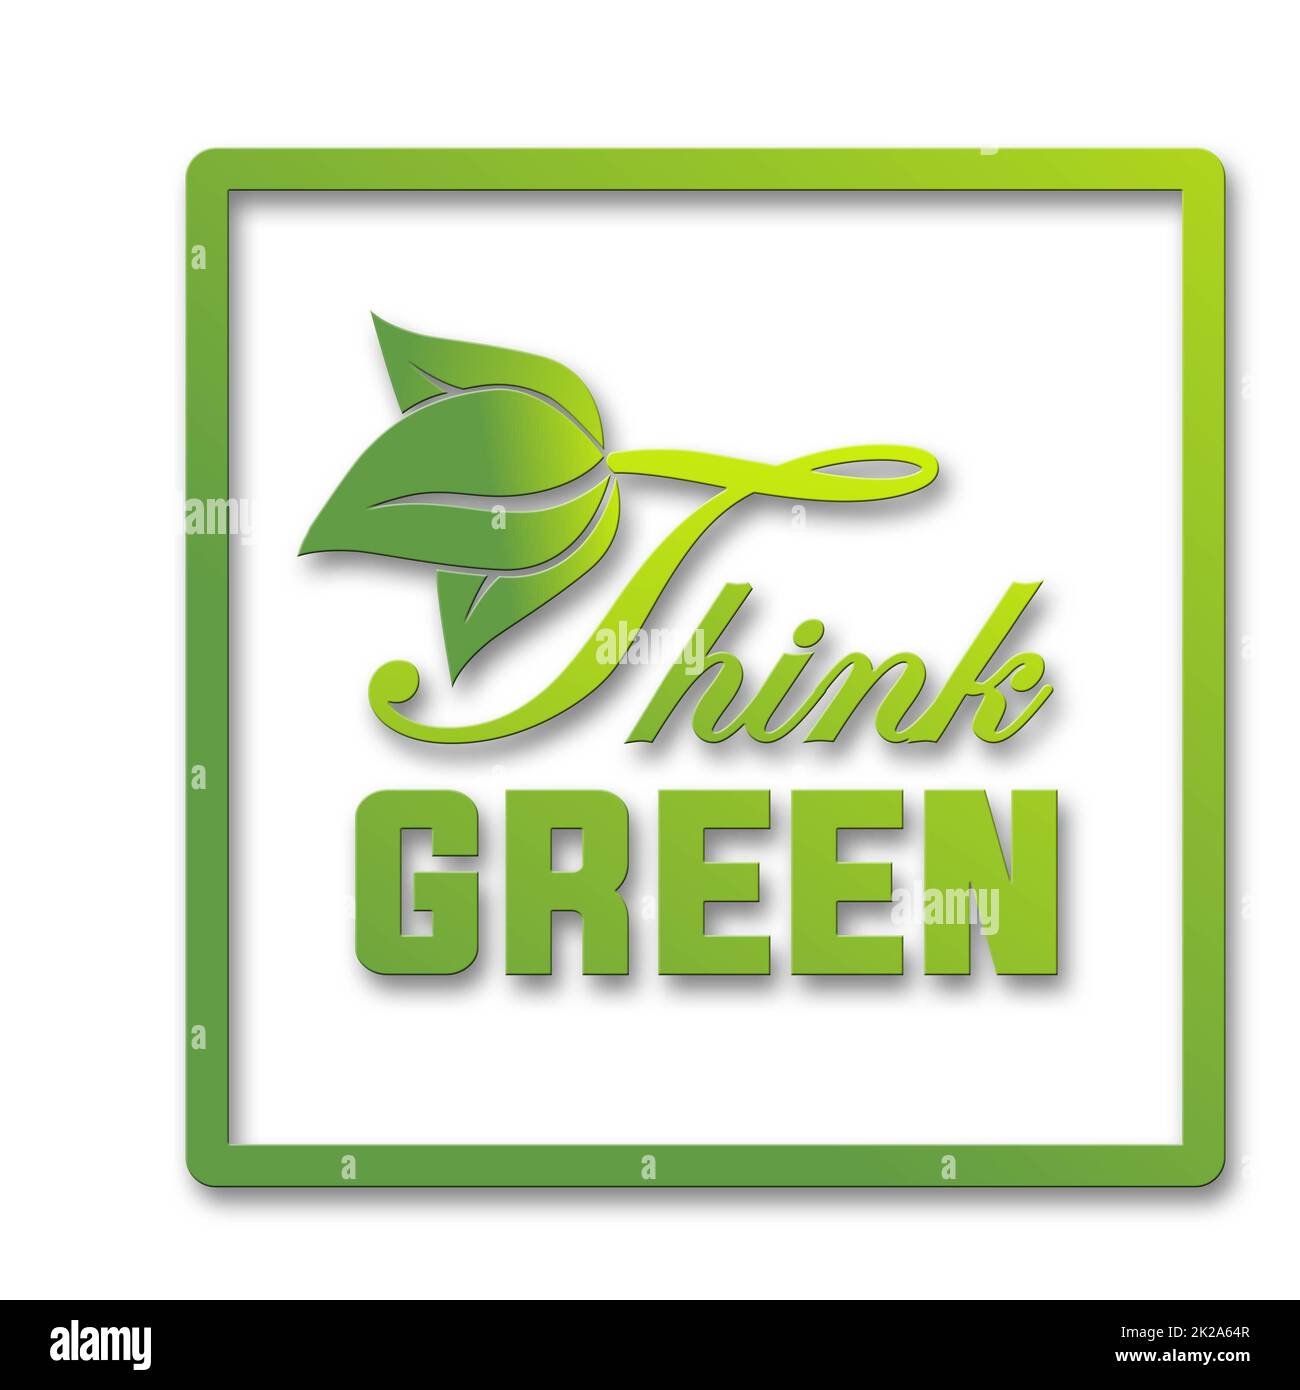 Text Logo Think Green Concept - Ecology and Green Energy in trendy style with Leaf Plant Elements and frame - isolated on white background Stock Photo